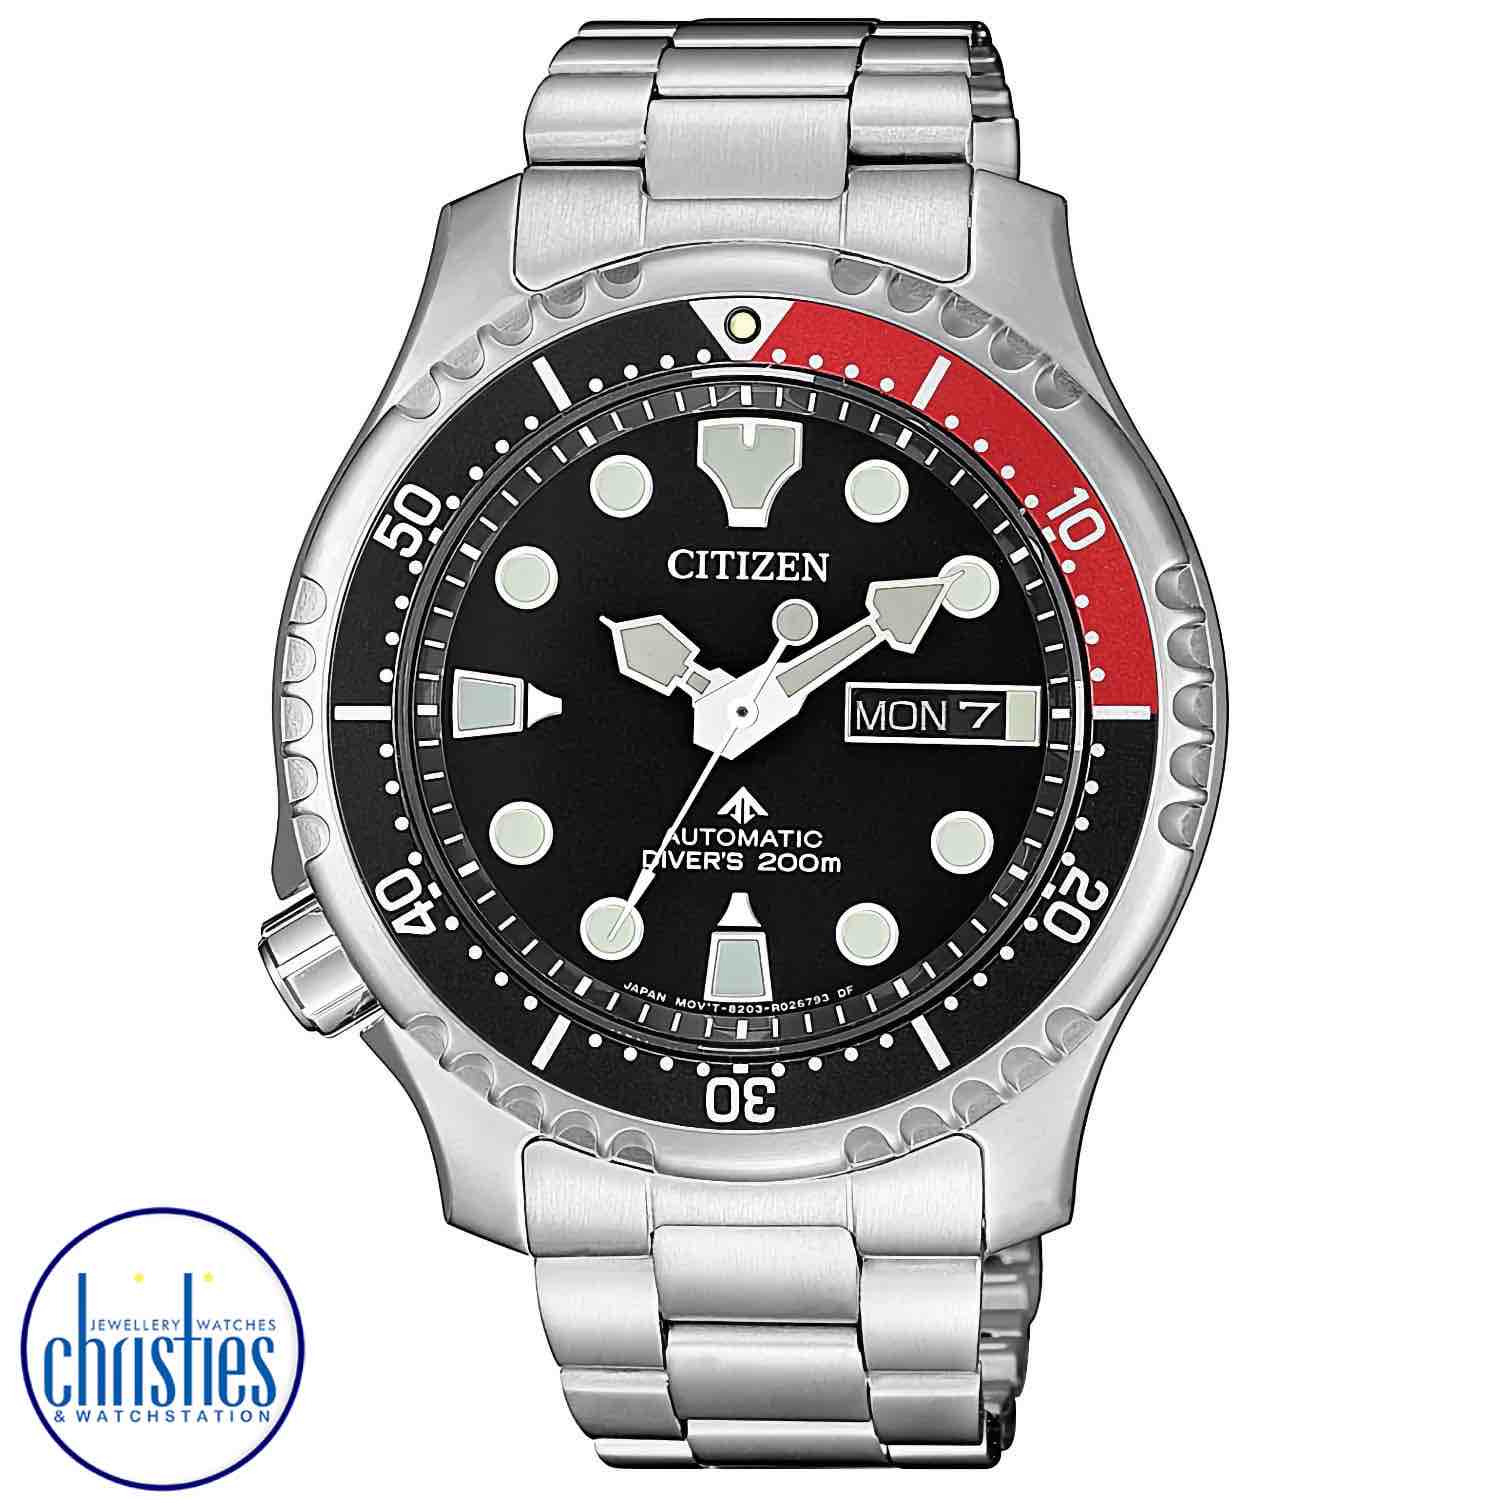 NY0085-86E CITIZEN Automatic Divers Watch. An enticing fusion of precision, durability and stylish design elements, this watch reflects meticulously considered craftsmanship in the pursuit of enduring quality.